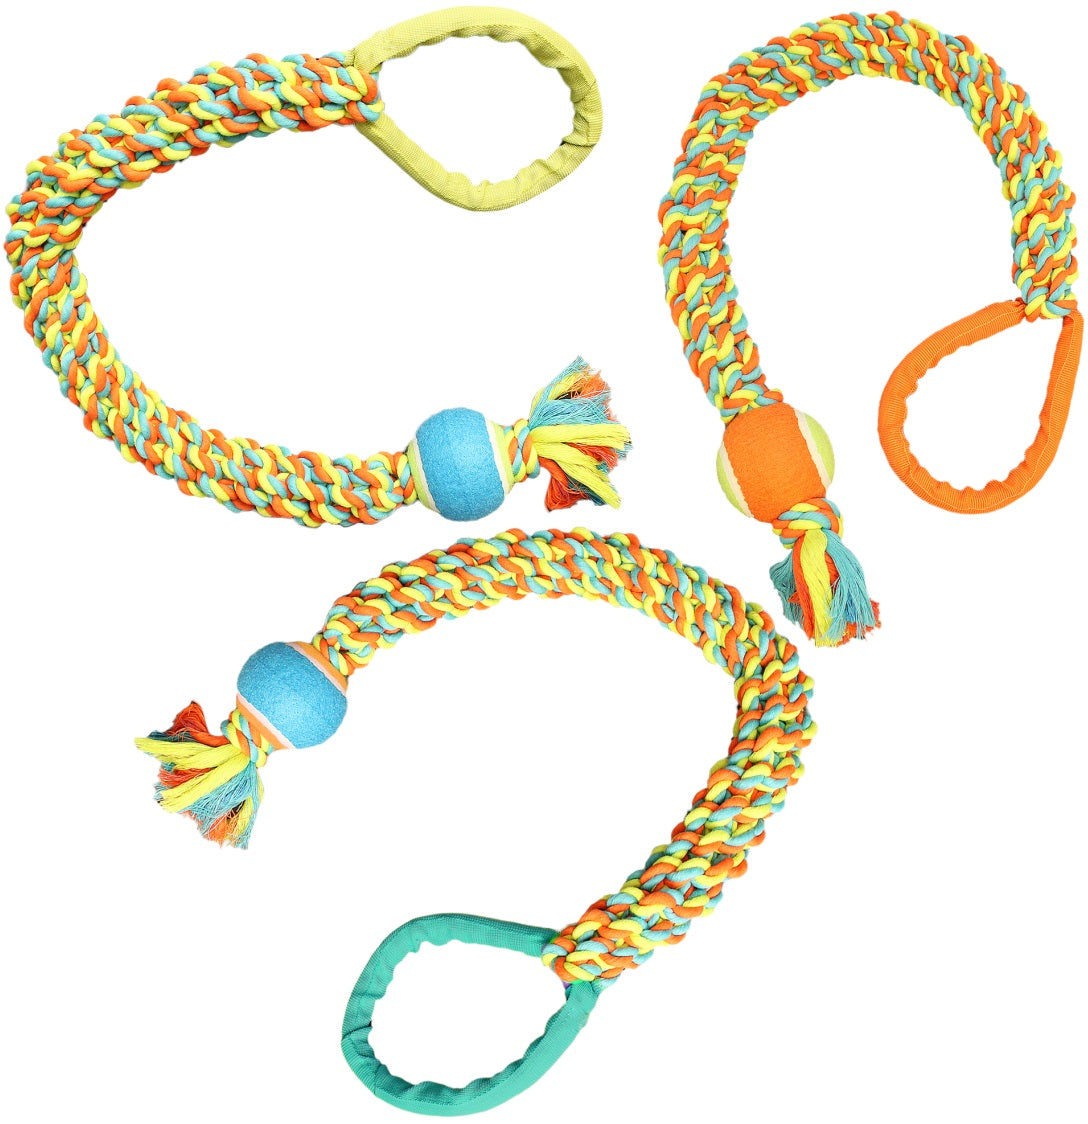 Chomper WB15524 Long Rope With Tennis & Ballistic Tug Dog Toy, Assorted